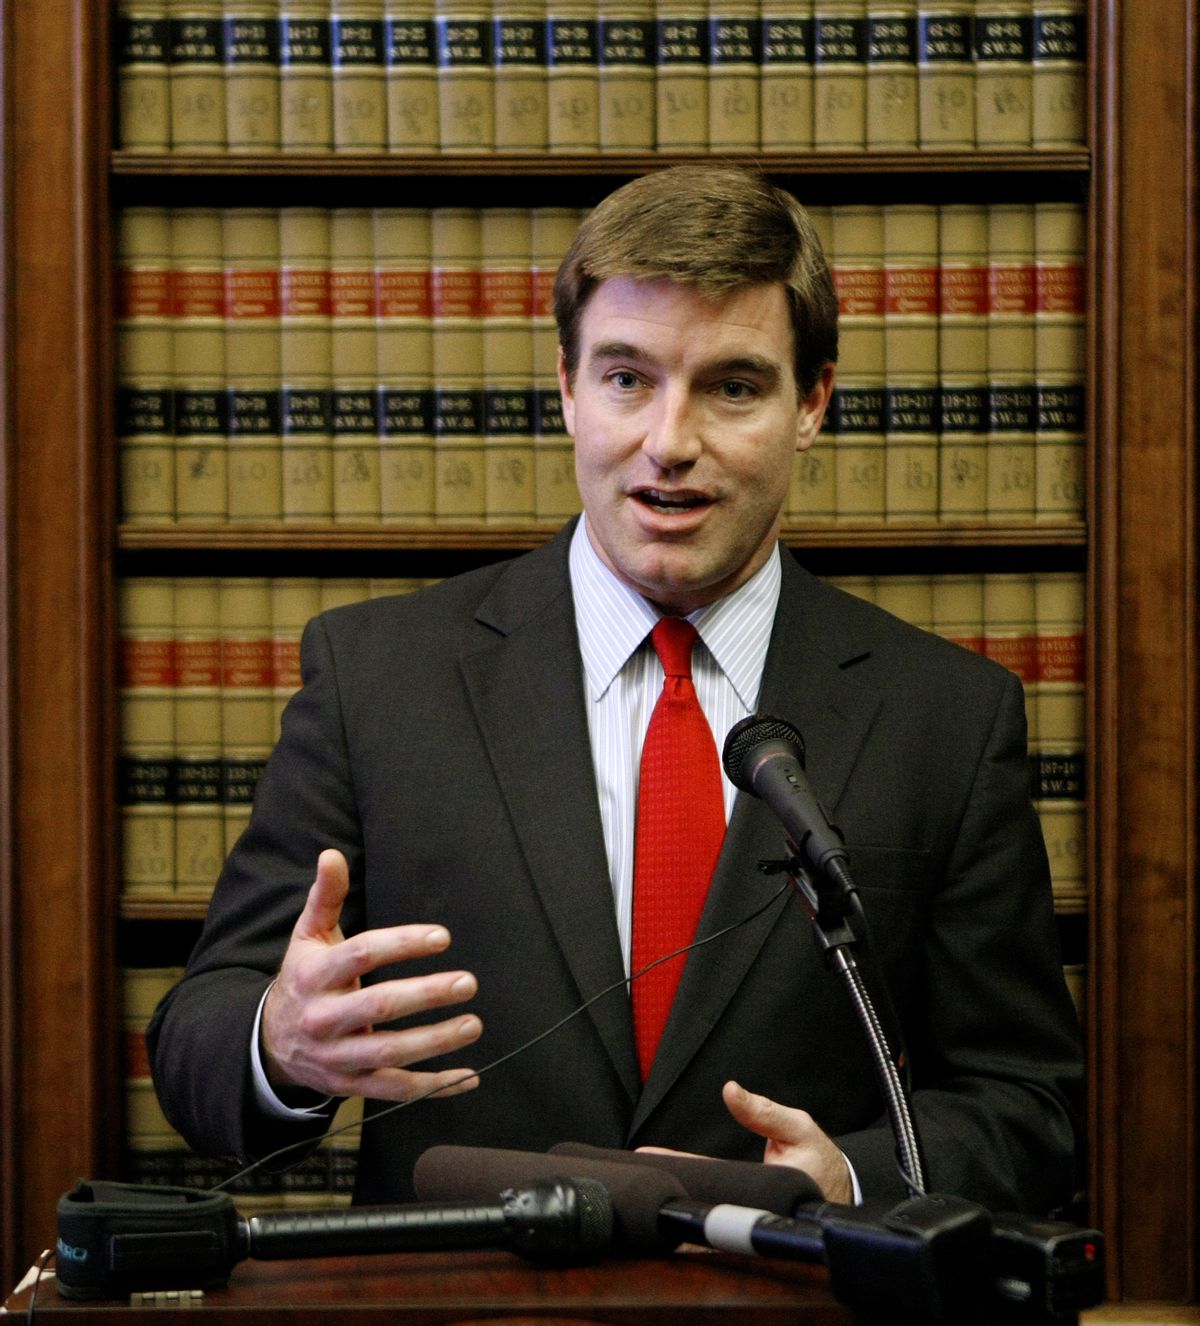 Attorney General and Democratic U.S. Senate candidate Jack Conway speaks during a news conference at his office in Frankfort, Ky., Thursday, April 1, 2010. Conway defended his decision to not join other states in filing a lawsuit to stop health care reforms from taking effect.
  (AP Photo/Ed Reinke) (Ed Reinke)